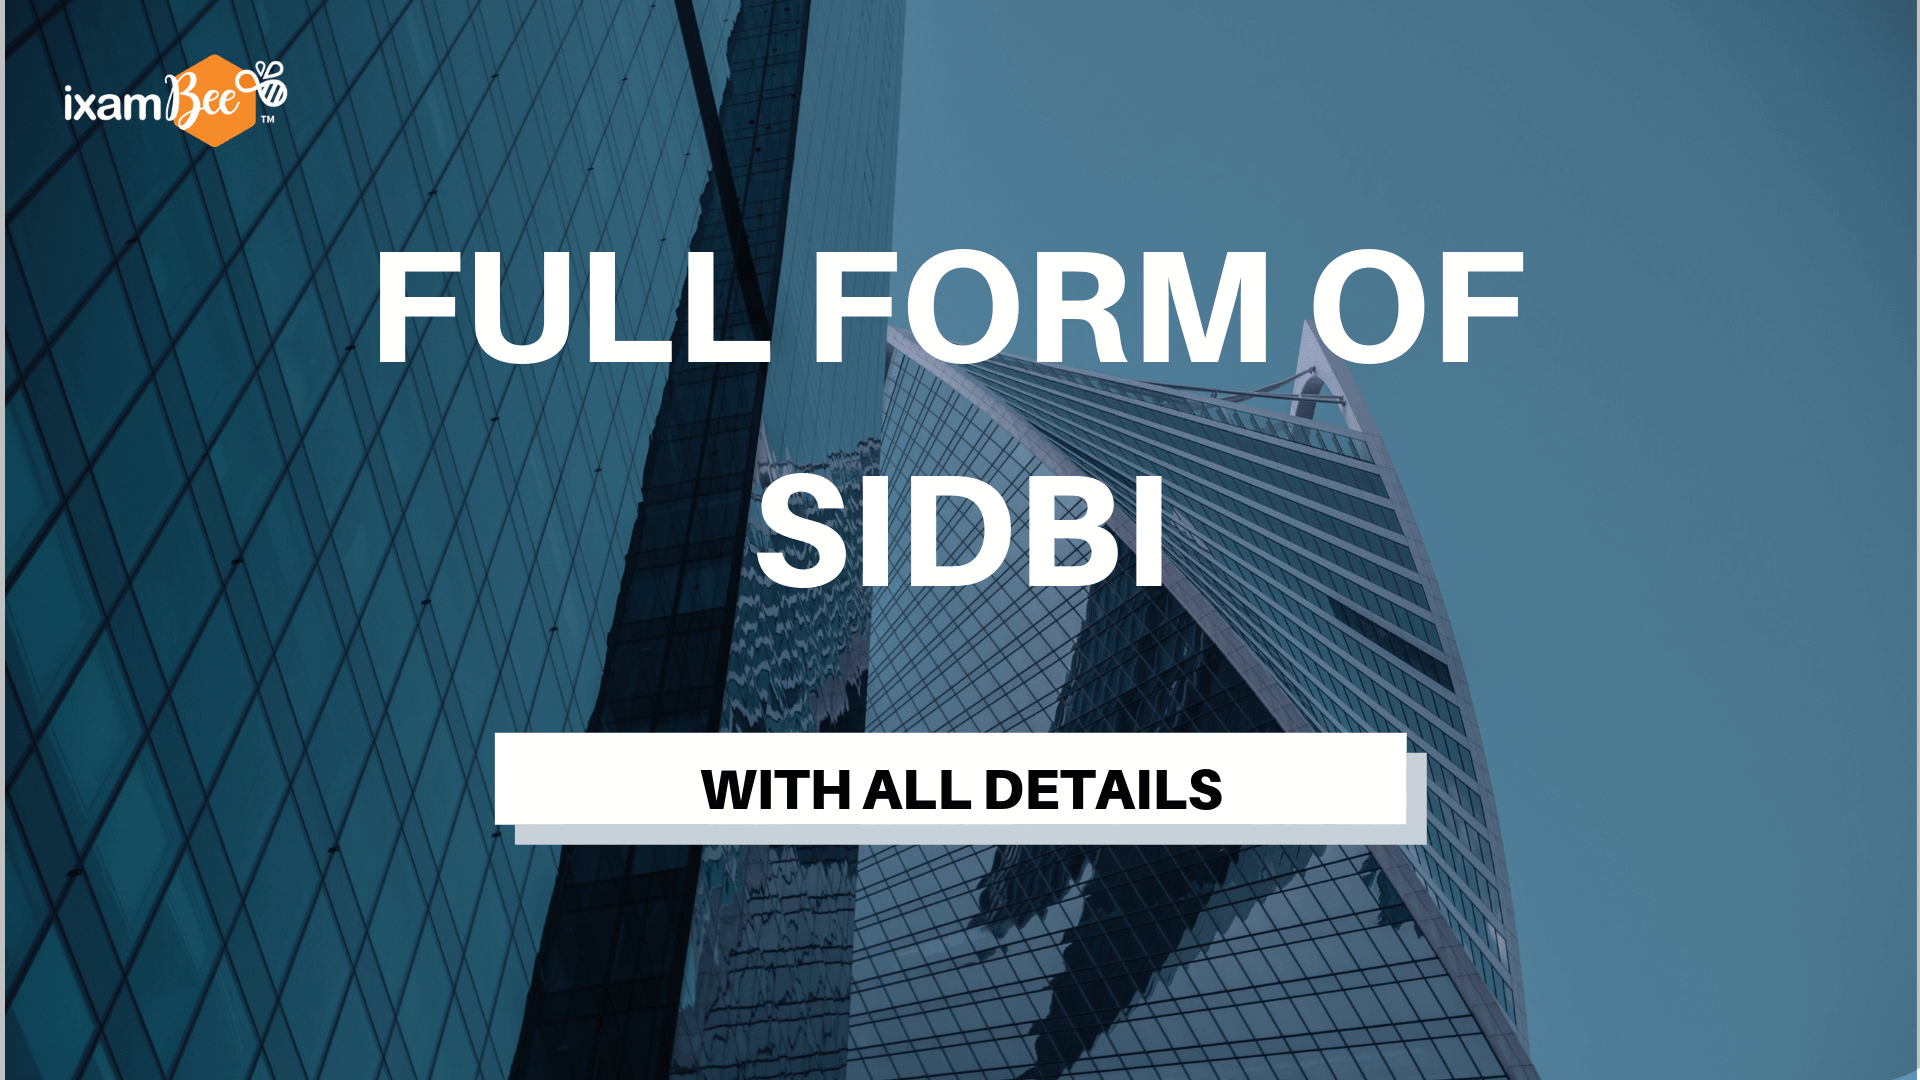 Full Form of SIDBI with all details